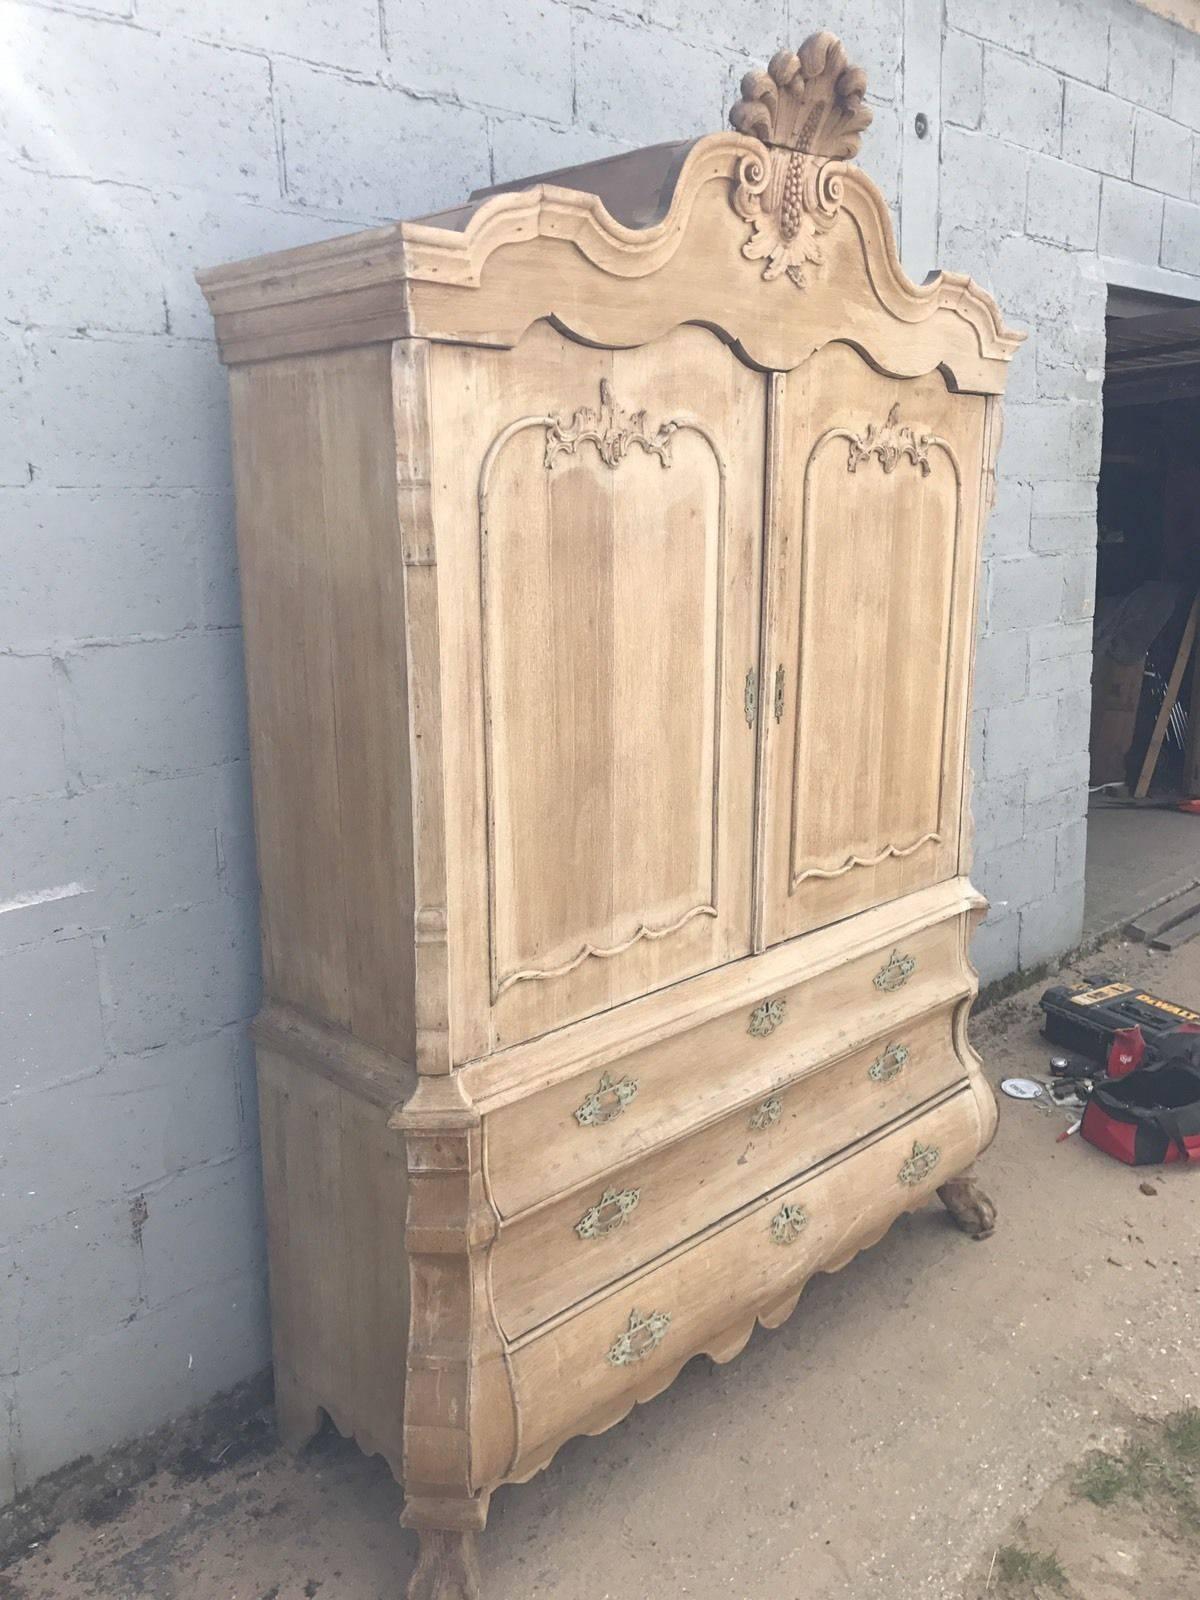 Here we have a stunning French linen press or armoire. It's been stripped back to its original wood and has fabulous patina from over the centuries. Dated circa 1780s.

Dismantled for ease of transportation. Price includes putting together at your